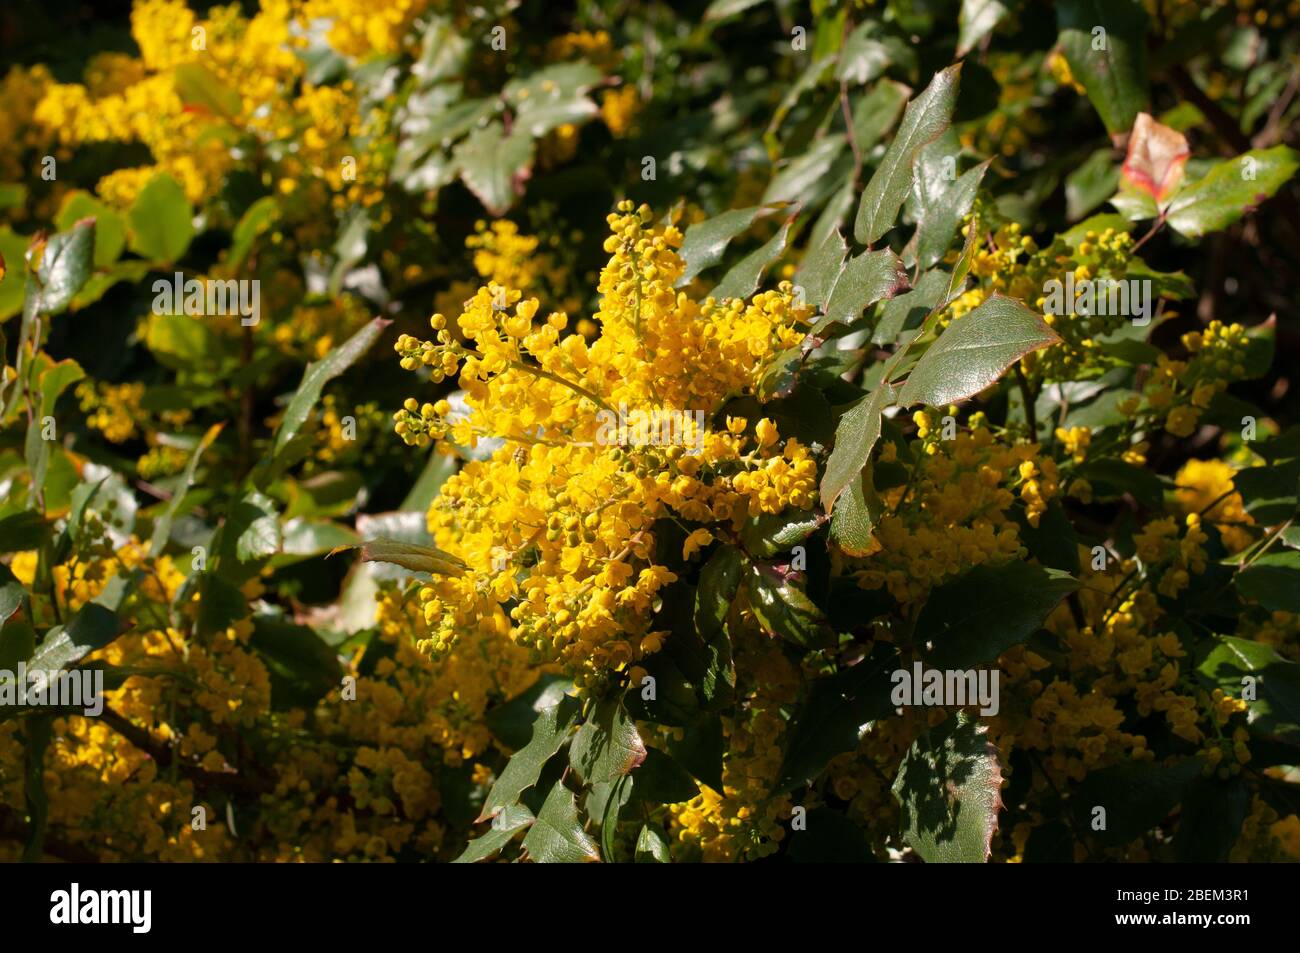 close-up of yellow flowers of an oregon grape or mahonia Stock Photo